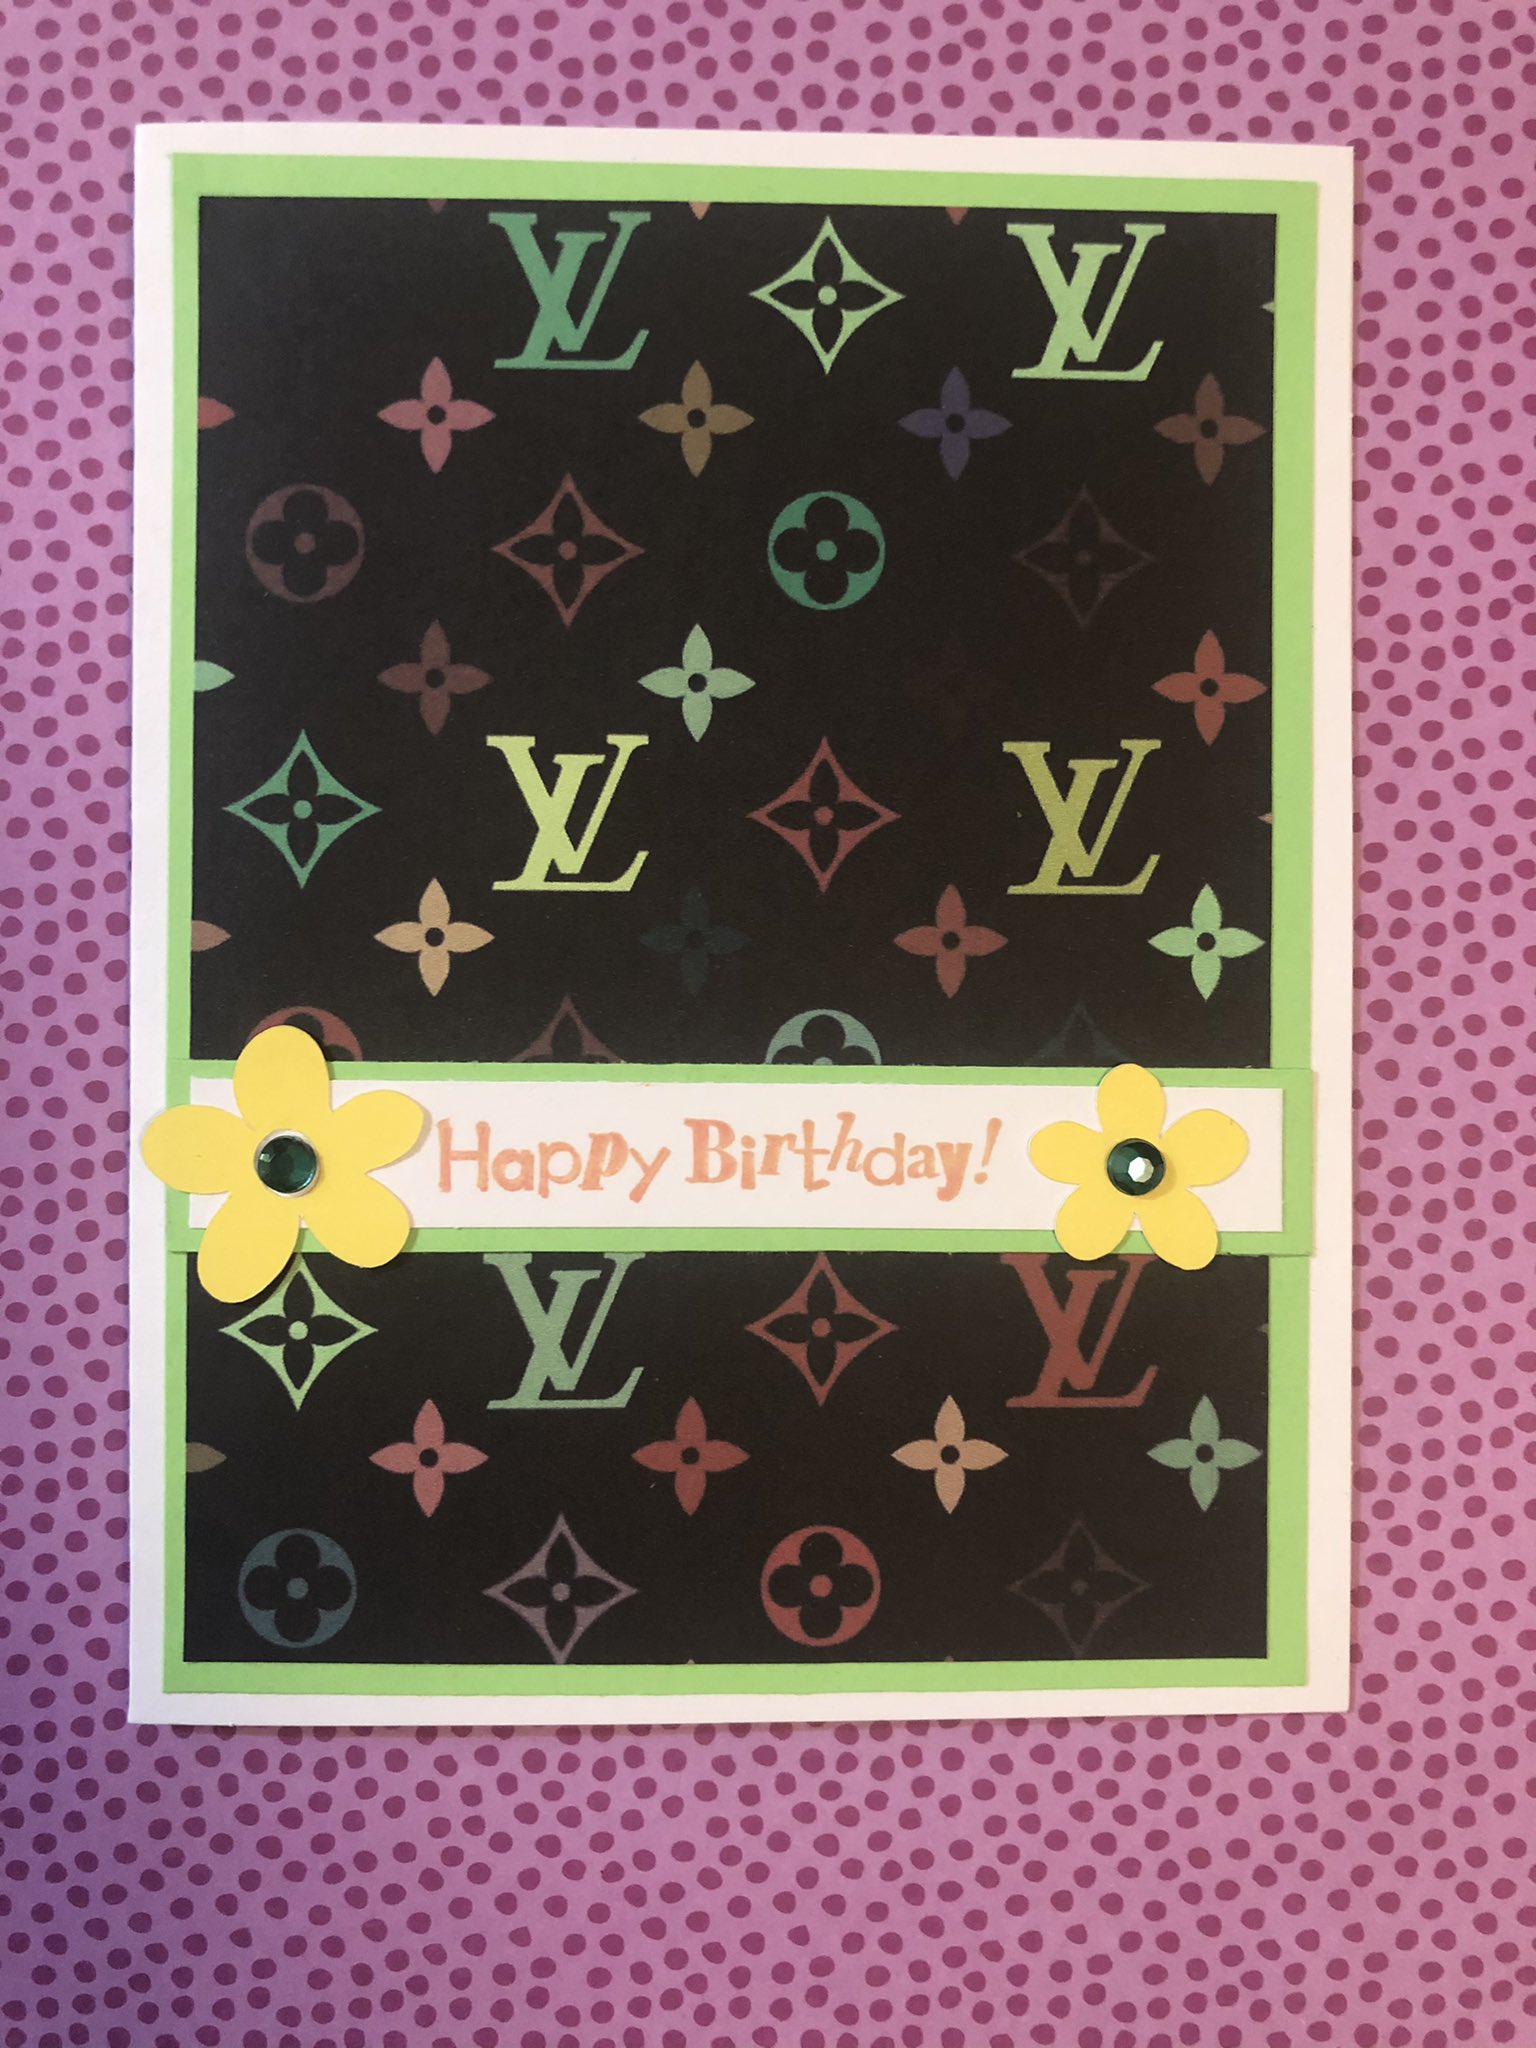 TheDesignDeskNY on X: New card Louis Vuitton available in my shop. Link in  bio. #louisvuitton #LouisVuittoncard #LV #Birthdaycards #thedesigndeskNY  #cardsforsale #smallbusiness #bymyself  / X